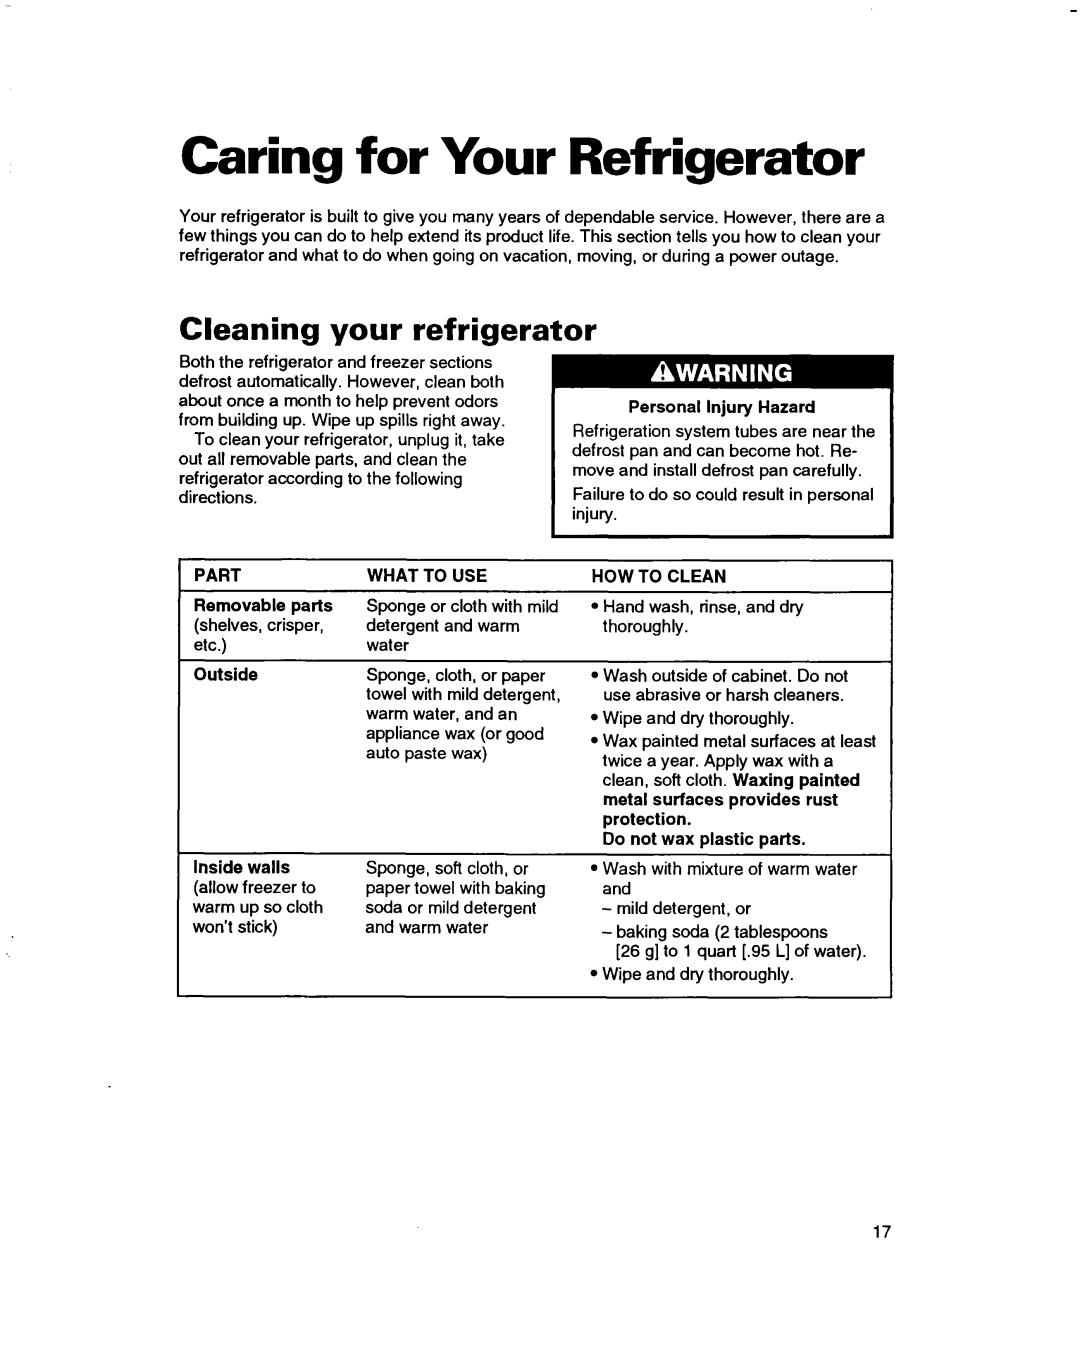 Whirlpool ET14JMXBN00 warranty Caring for Your Refrigerator, Cleaning your refrigerator 